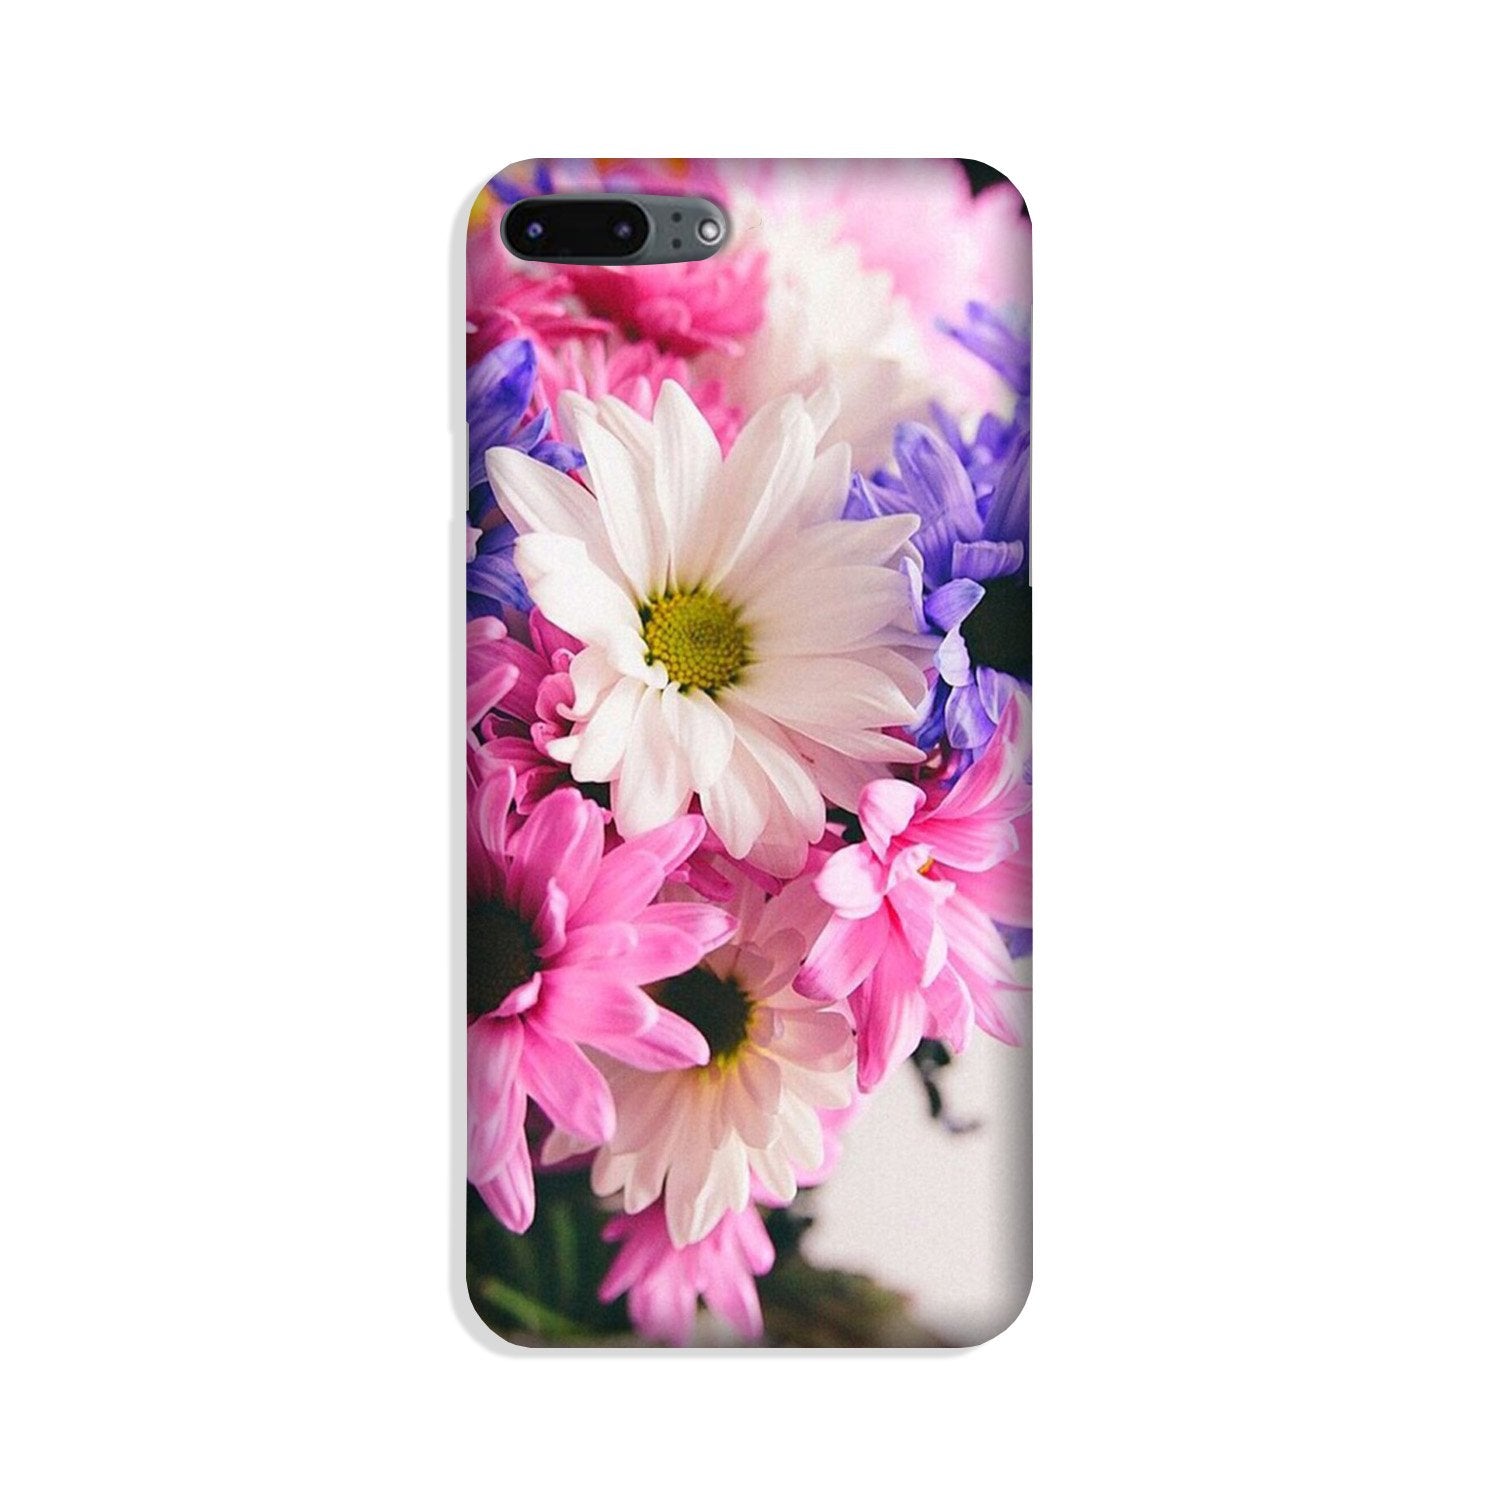 Coloful Daisy Case for iPhone 8 Plus